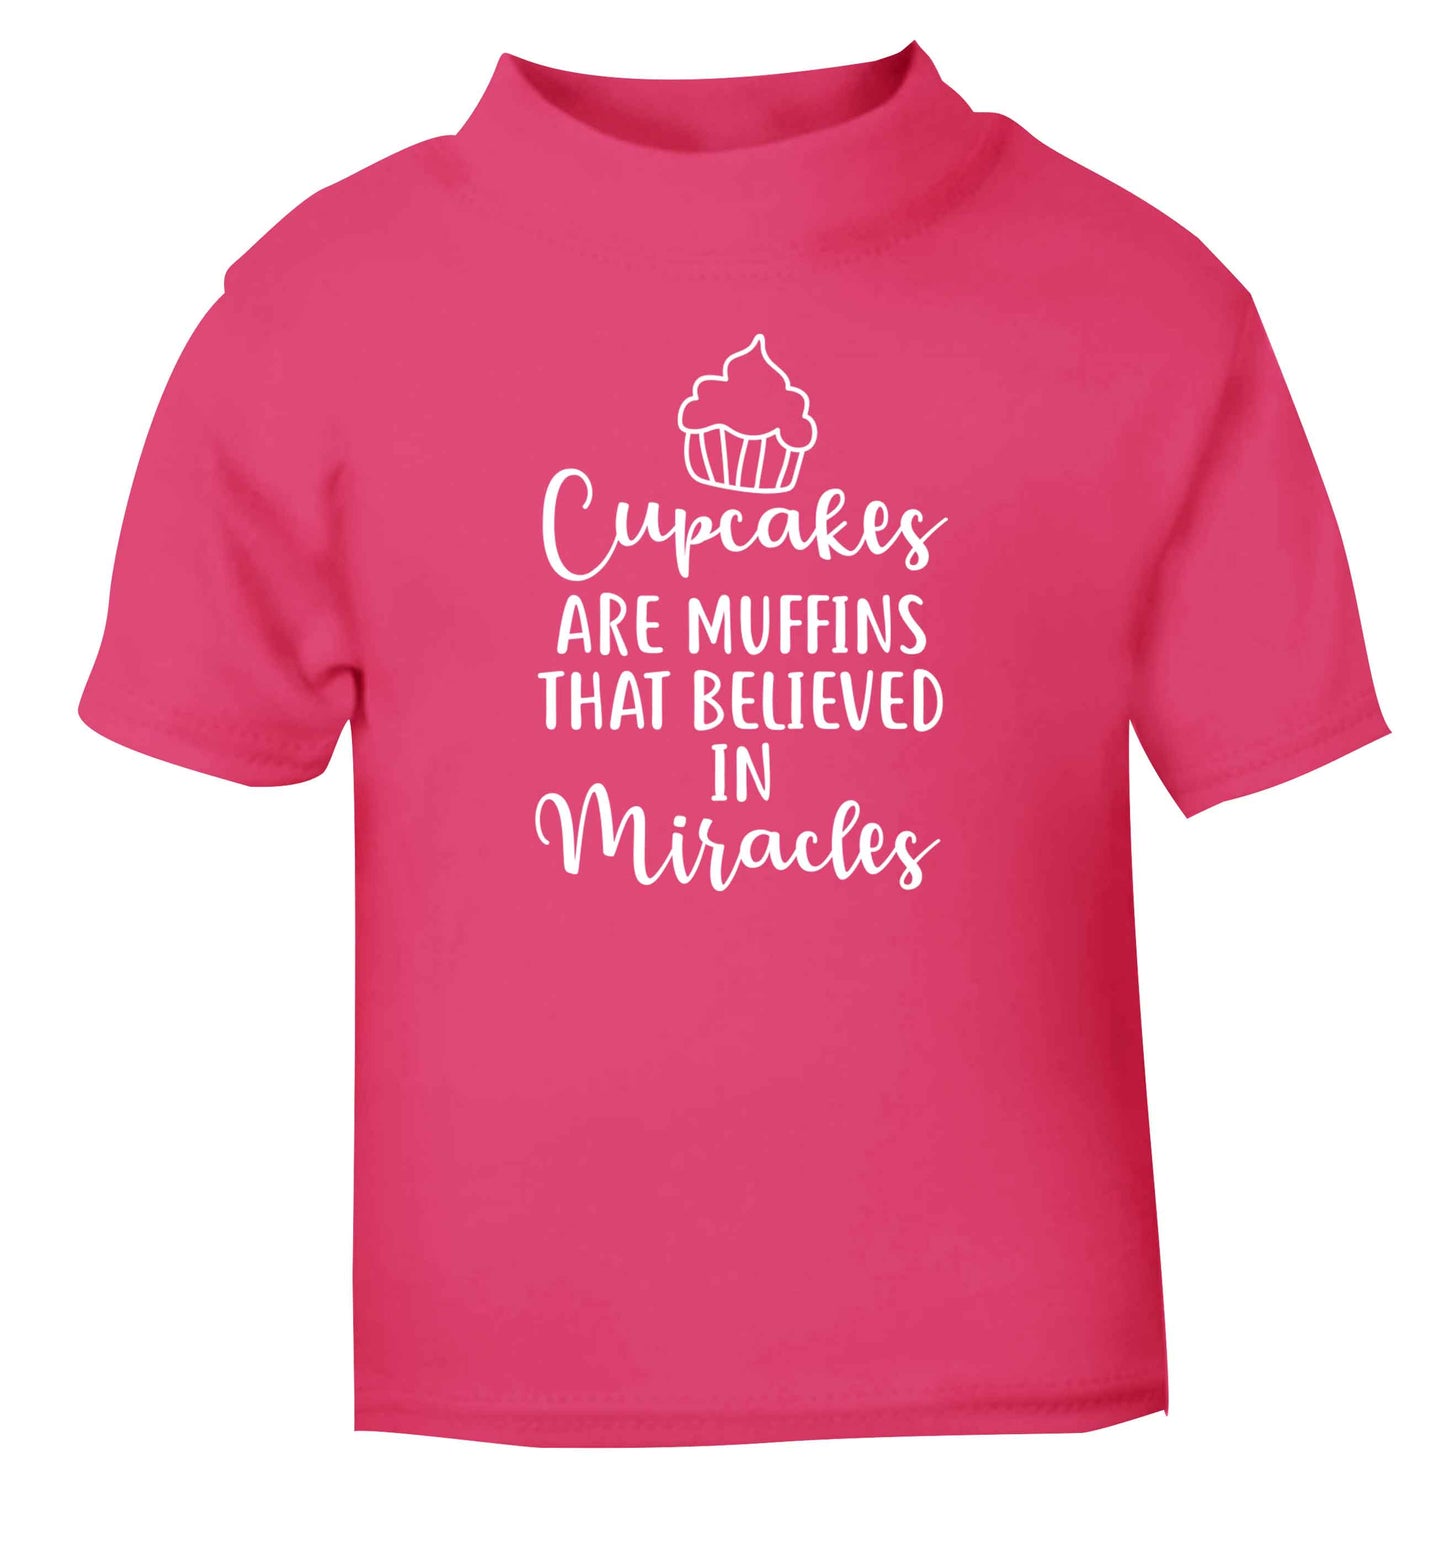 Cupcakes muffins that believed in miracles pink Baby Toddler Tshirt 2 Years